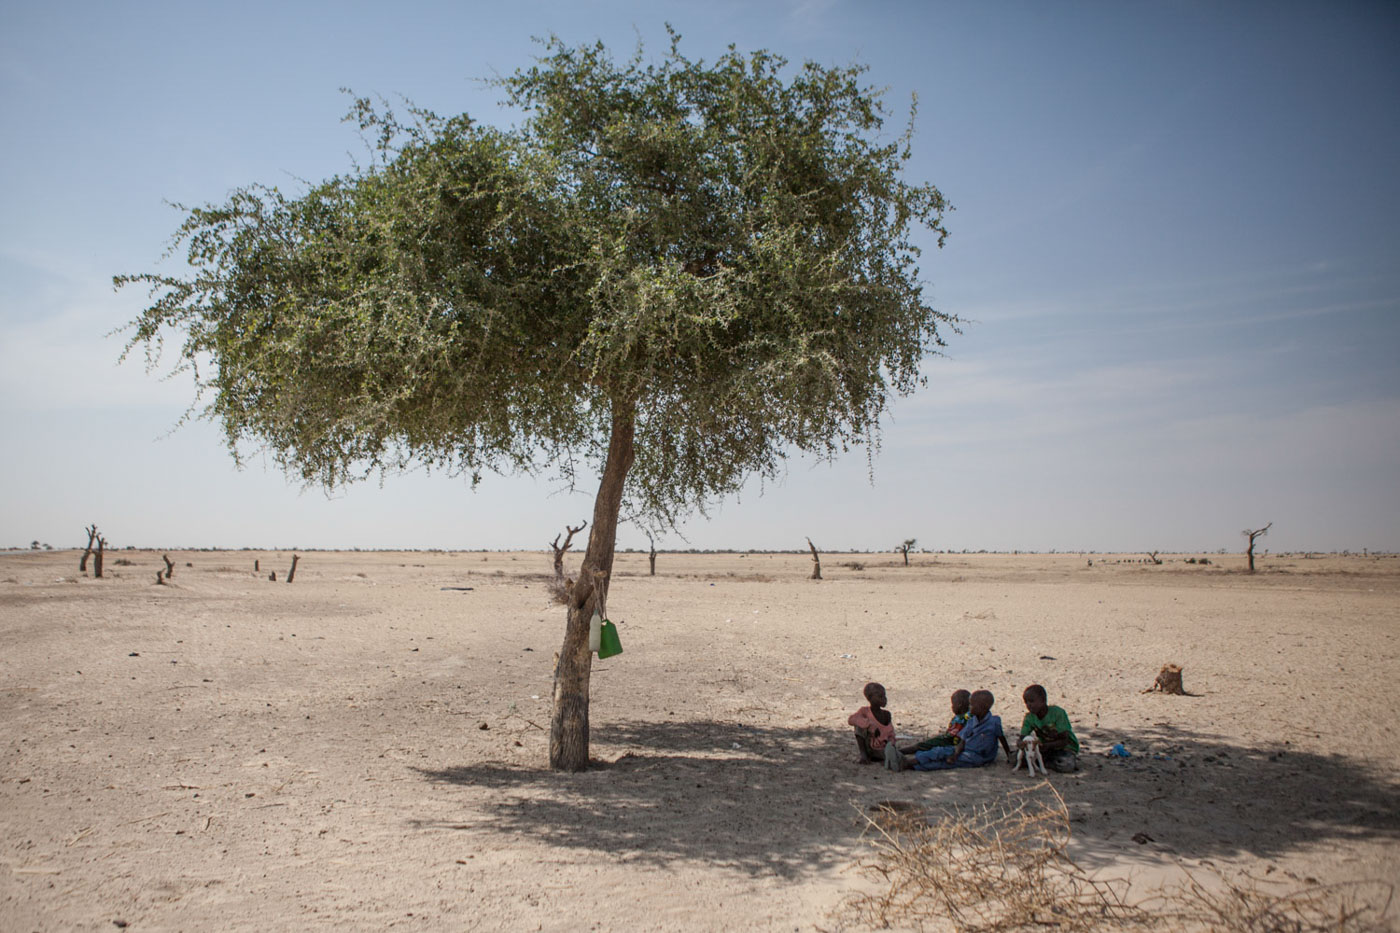 Boys, originally from Yebi, Nigeria, sit under the last remaining tree across from Garin Wanzam Camp in Diffa, Niger.Garin Wanzam Camp is the largest camp in the region hosting almost 23,000 displaced people. Many cut down trees in the area in order to help reduce the cost of firewood which can cost up to 30-40 percent of a family's monthly budget. 300,000 people displaced by the Boko Haram crisis are taking refuge in southern Niger, straining the already vulnerable environment of the Lake Chad Basin. 